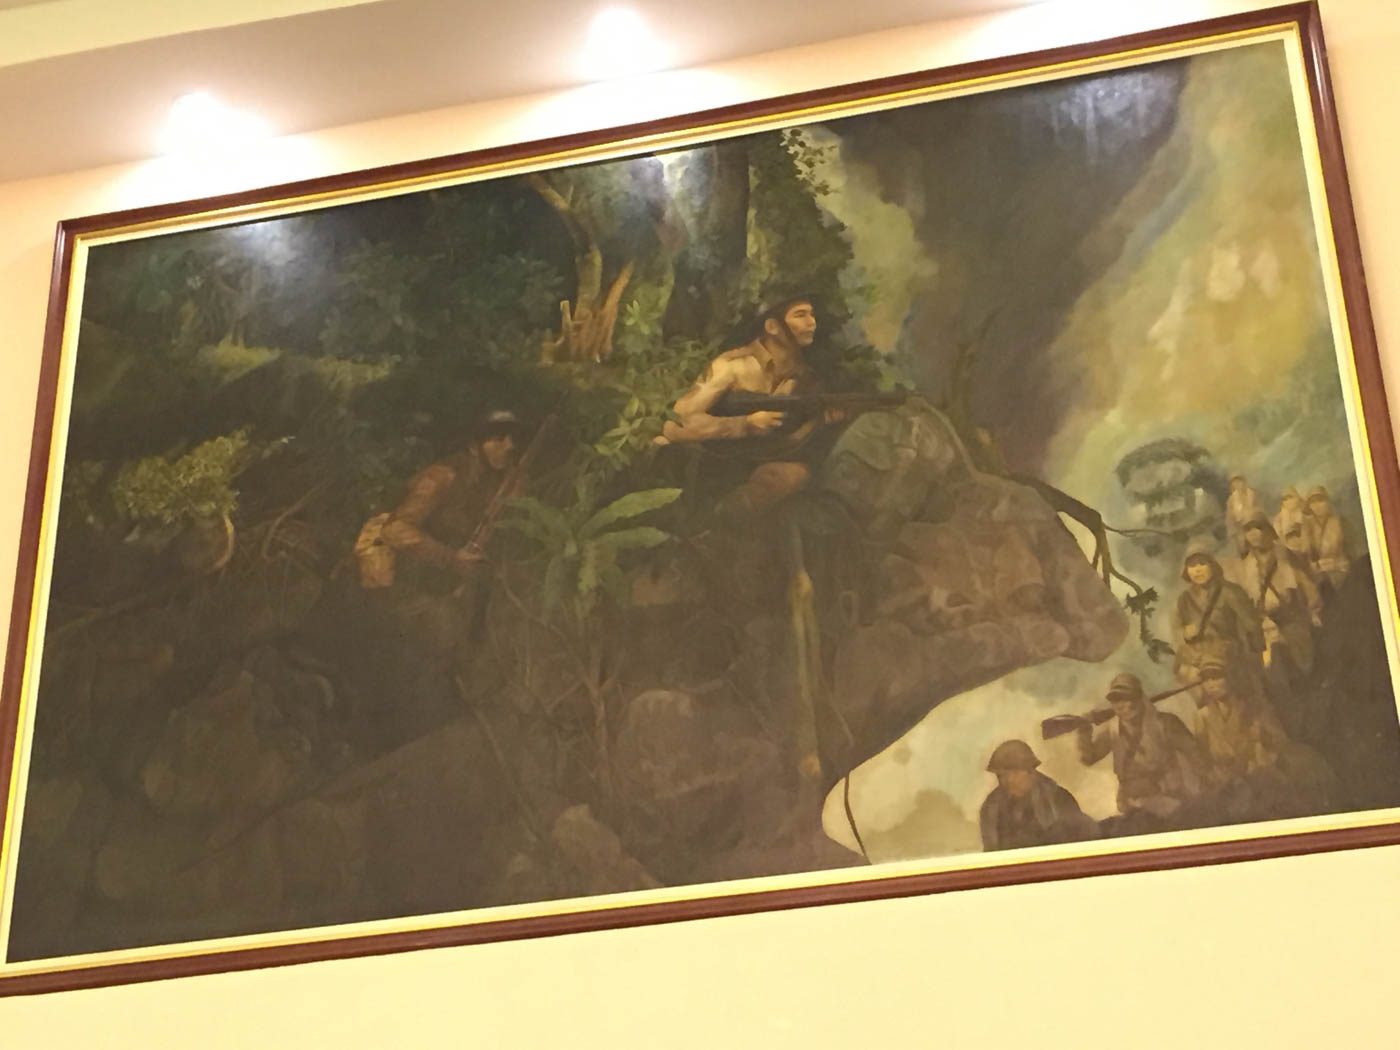 What’s a Marcos painting doing in Robredo’s future office?